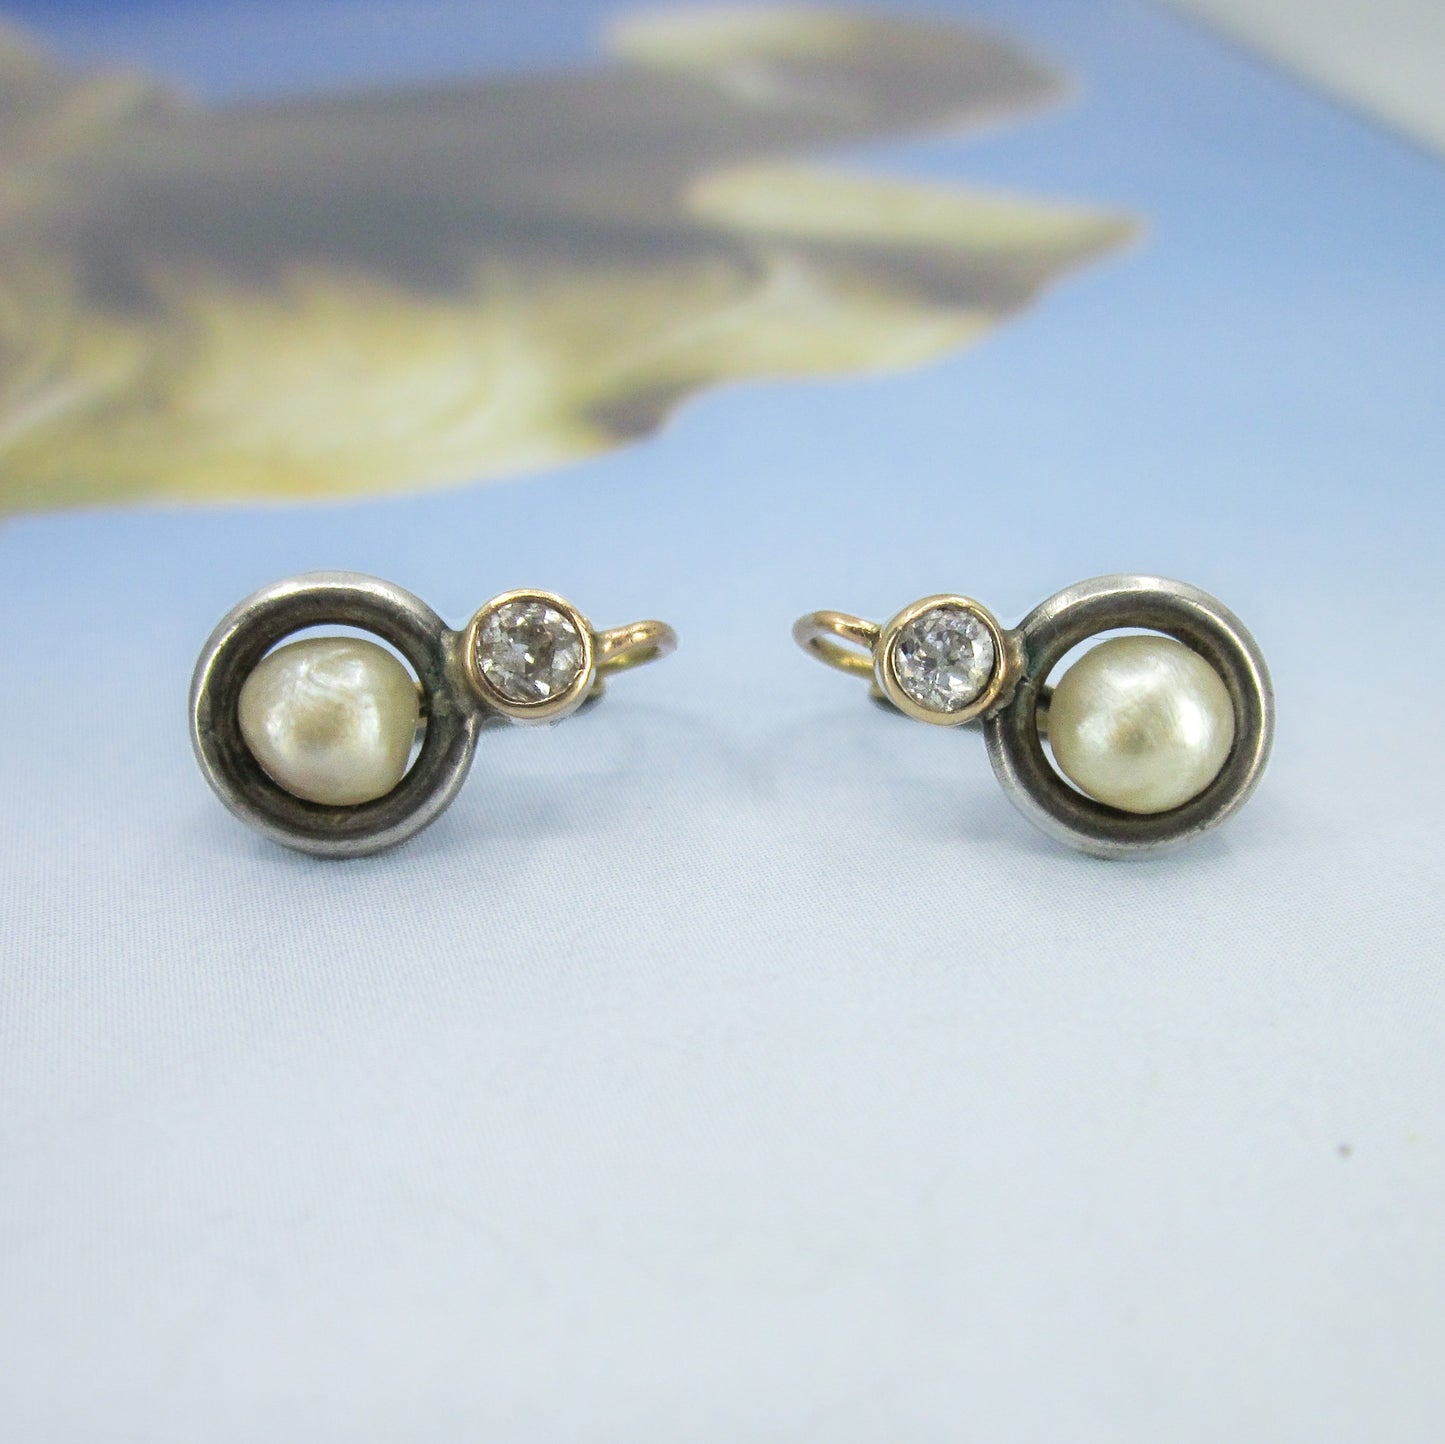 SOLD—Art Deco Old European Diamond and Pearl Earrings Silver/14 c. 1920